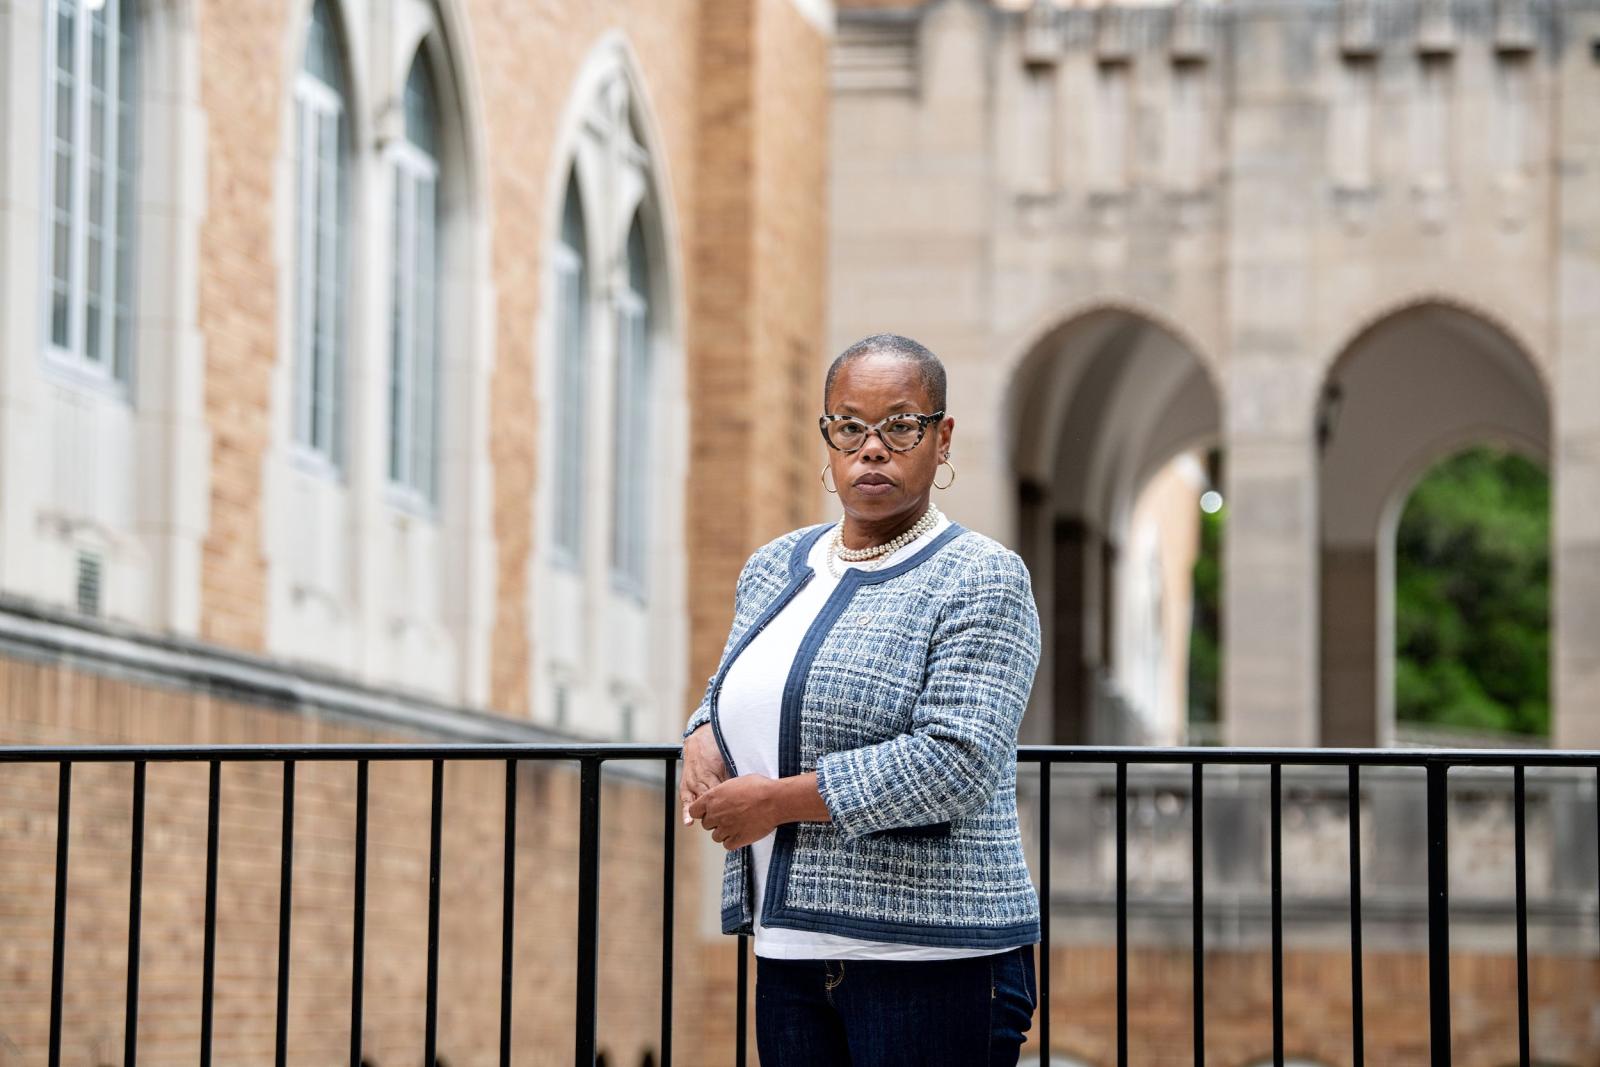 Lisa Crooms-Robinson in front of law school